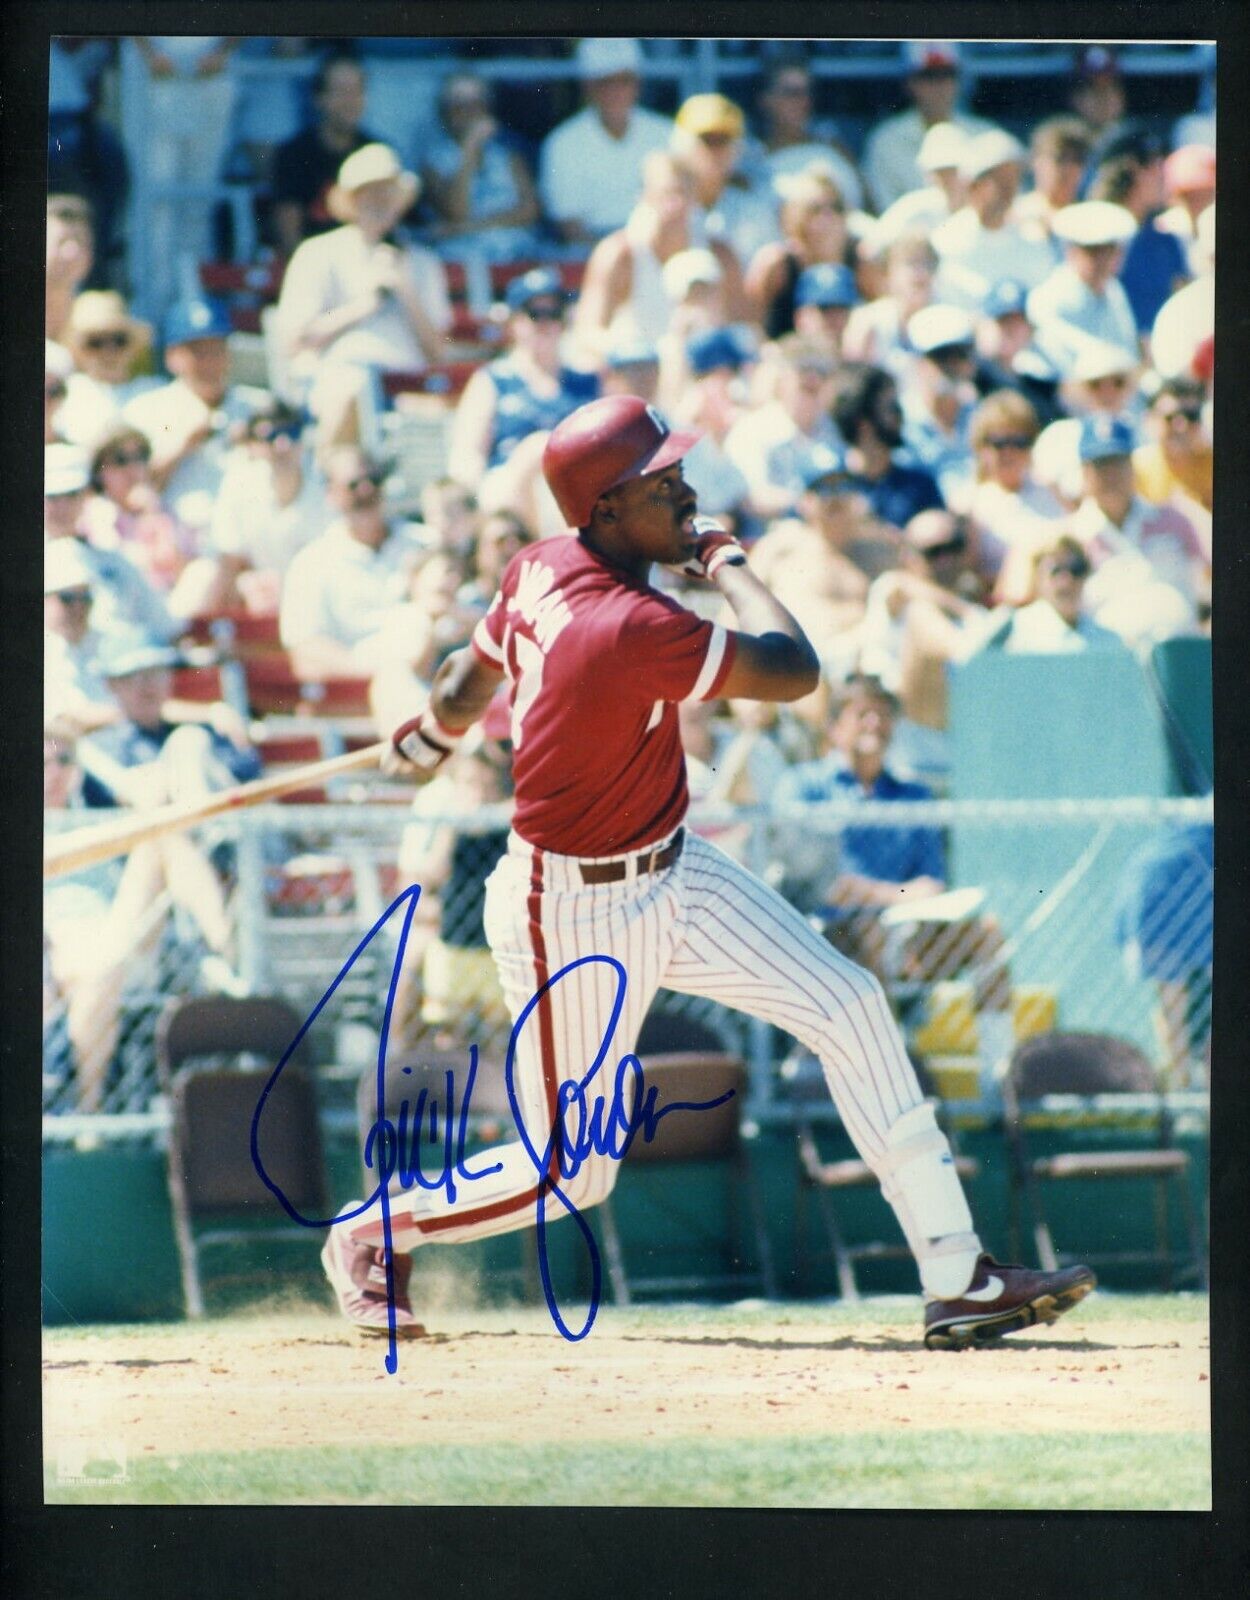 Rickey Jordan Signed Autographed 8x10 Photo Poster painting Philadelphia Phillies  SHIPPING